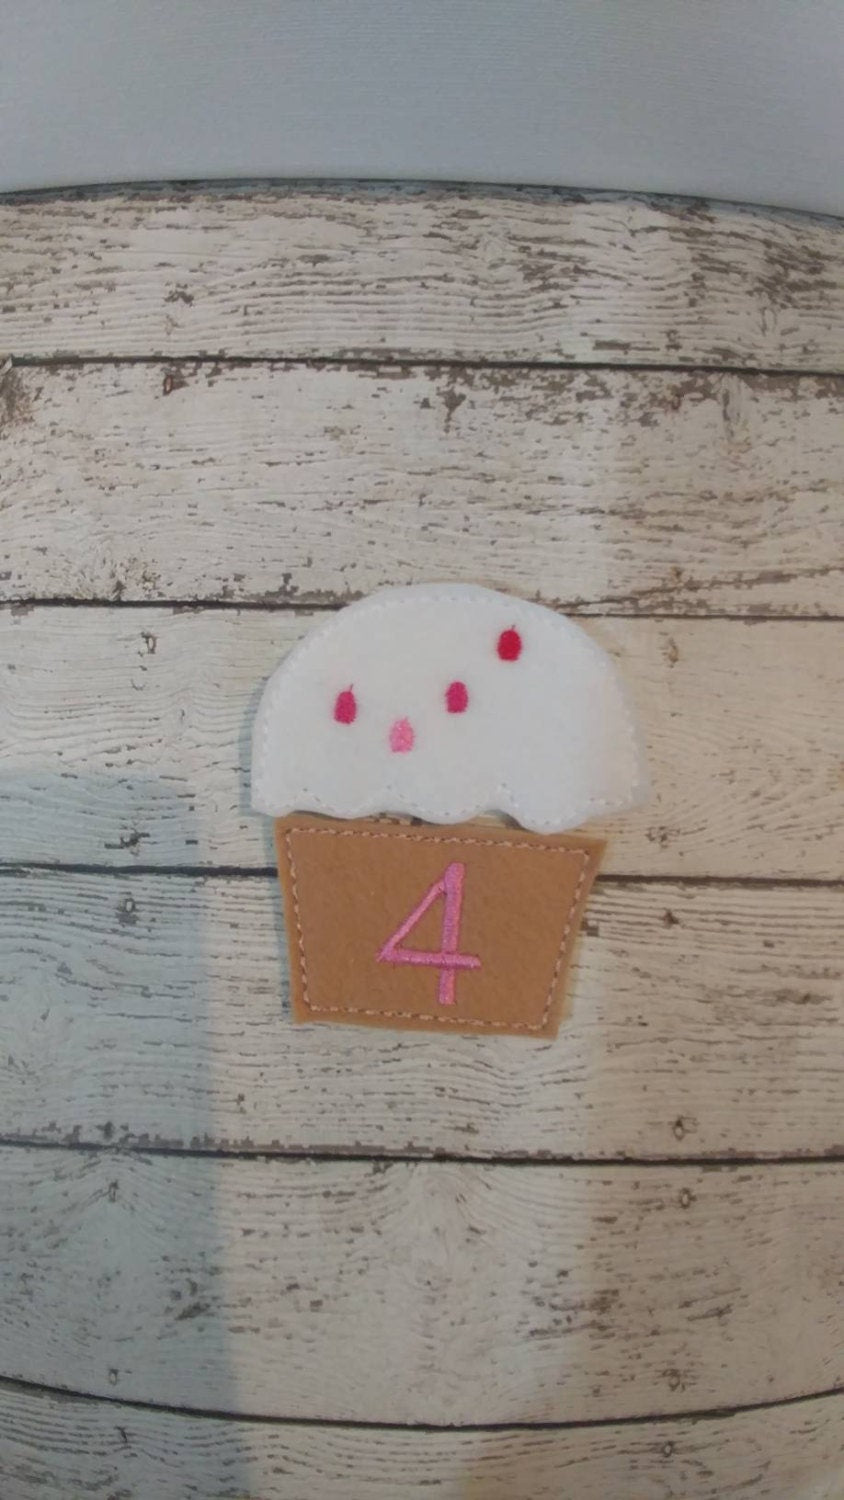 Felt counting cupcakes activity set for teaching counting and number recognition in the classroom or at home